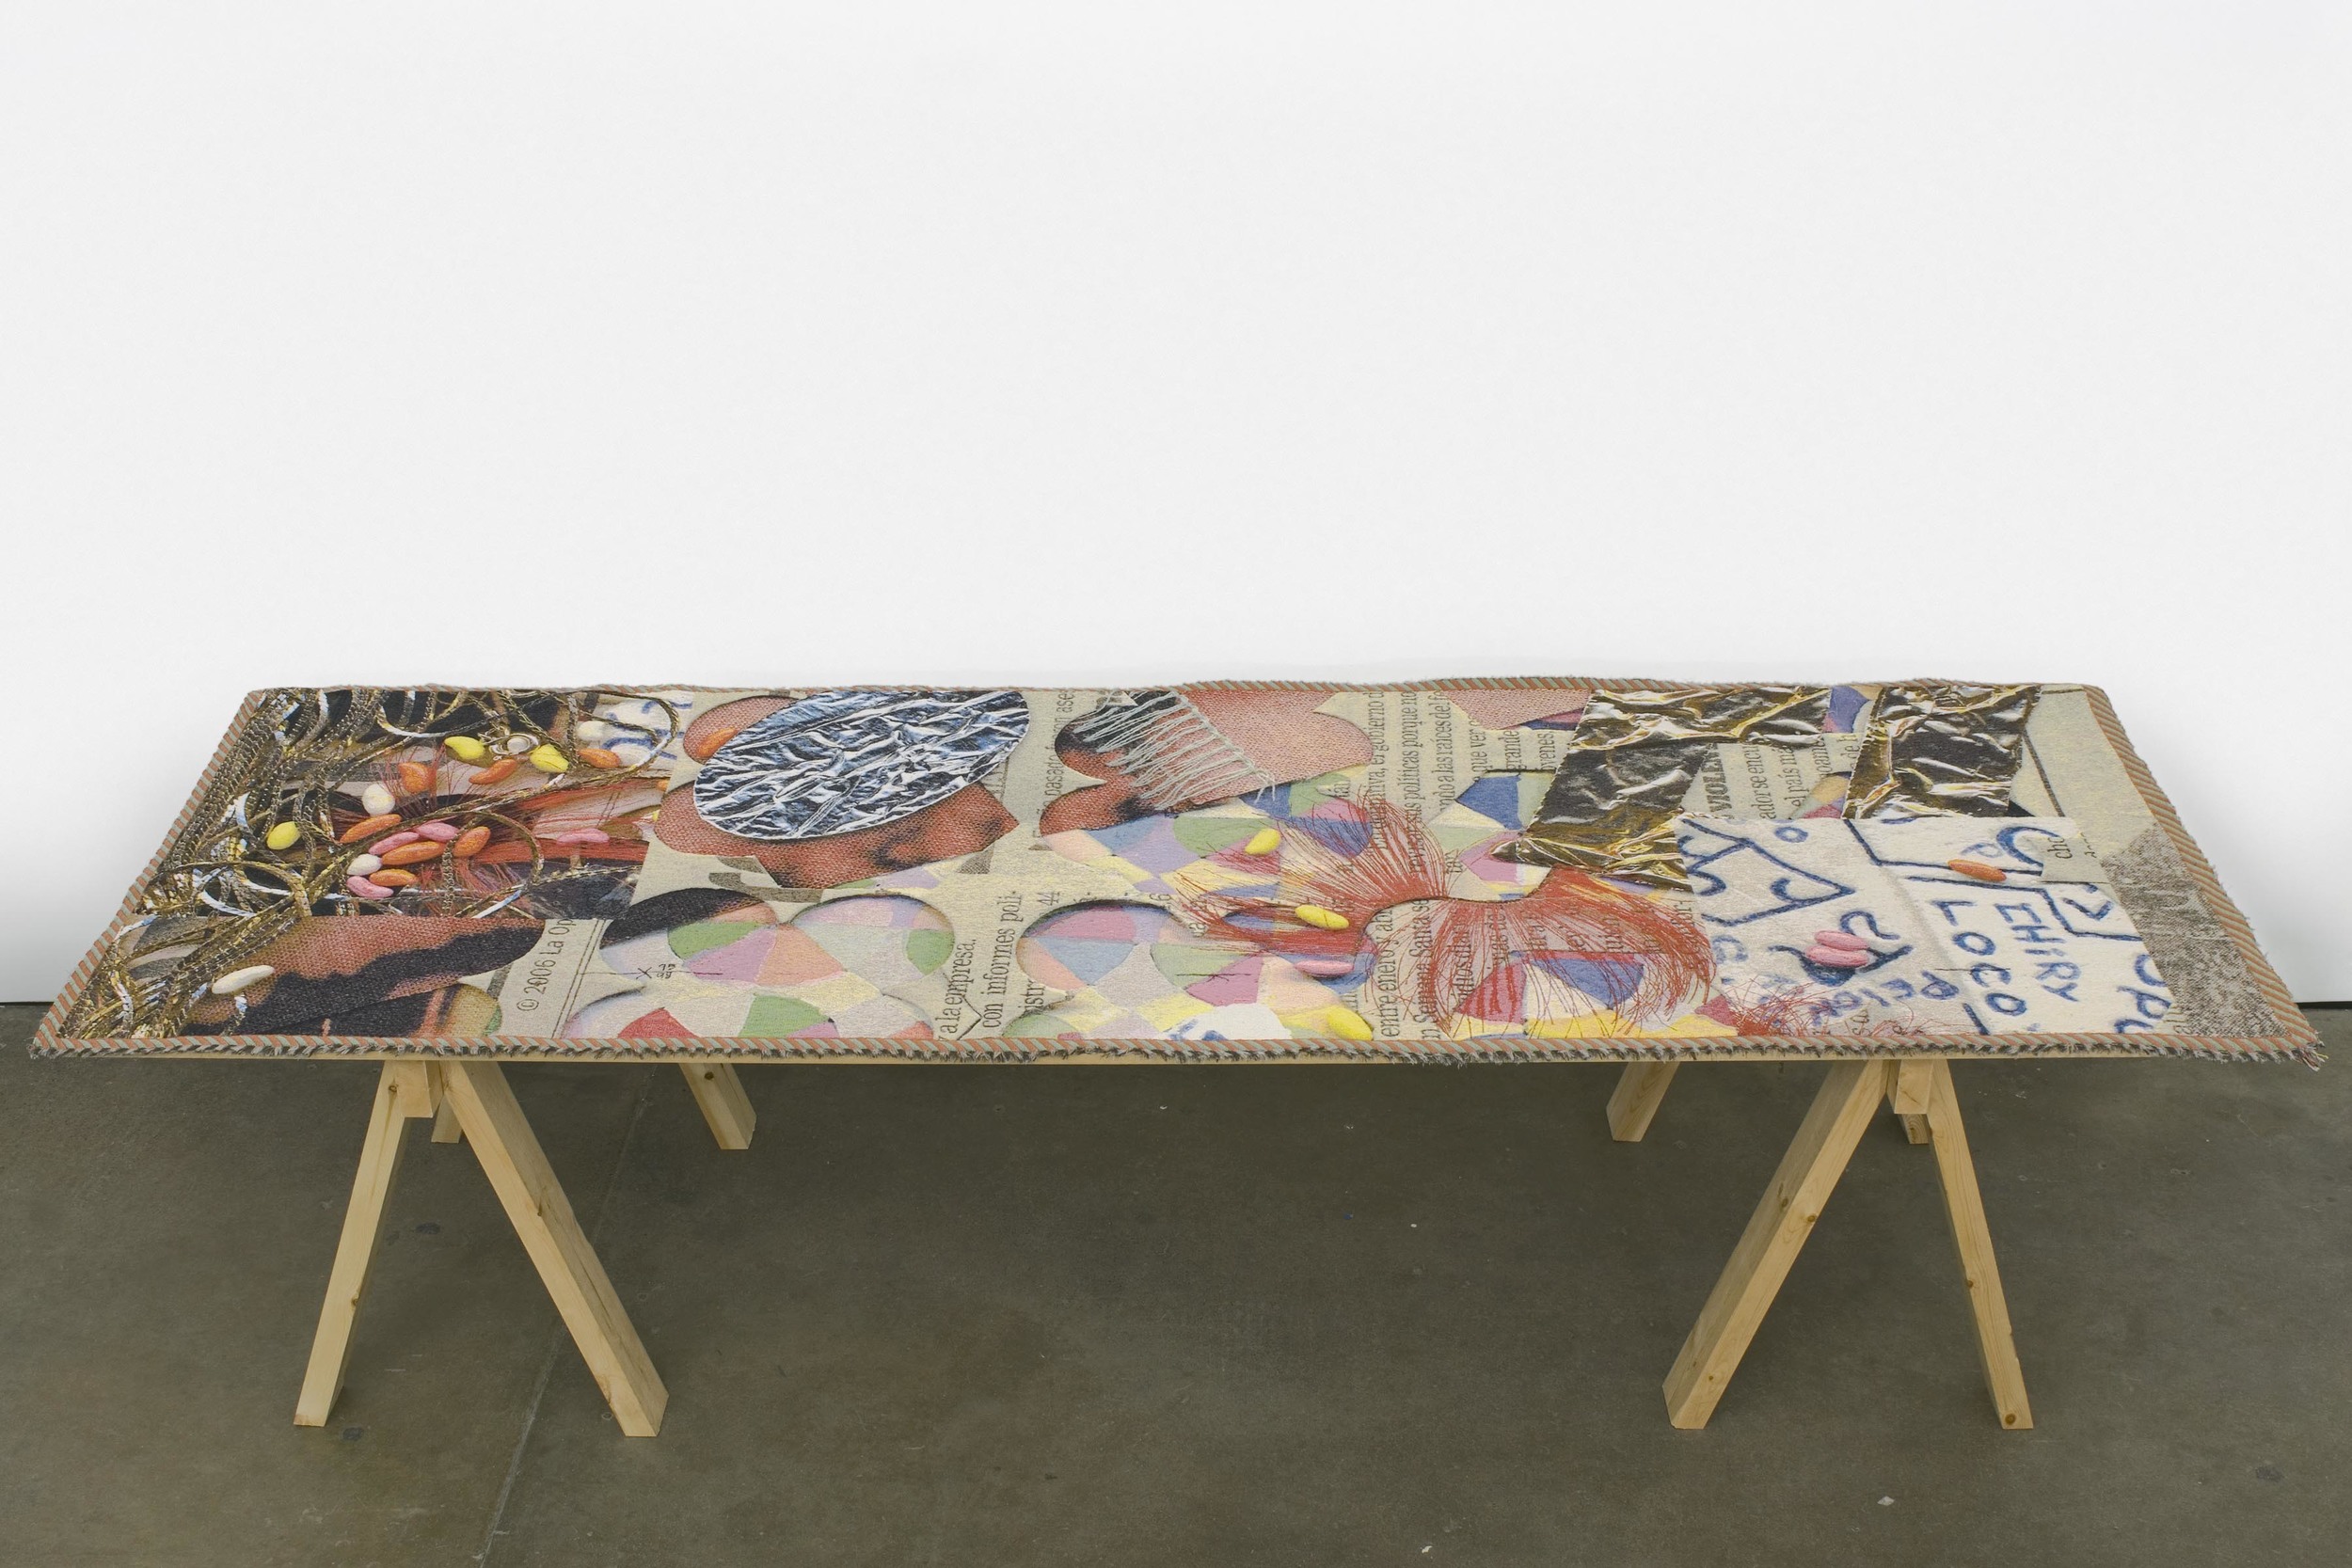     Pae White Table-scraps 2 2007 Cotton and Trevira 293.37 x 102.87 cm 